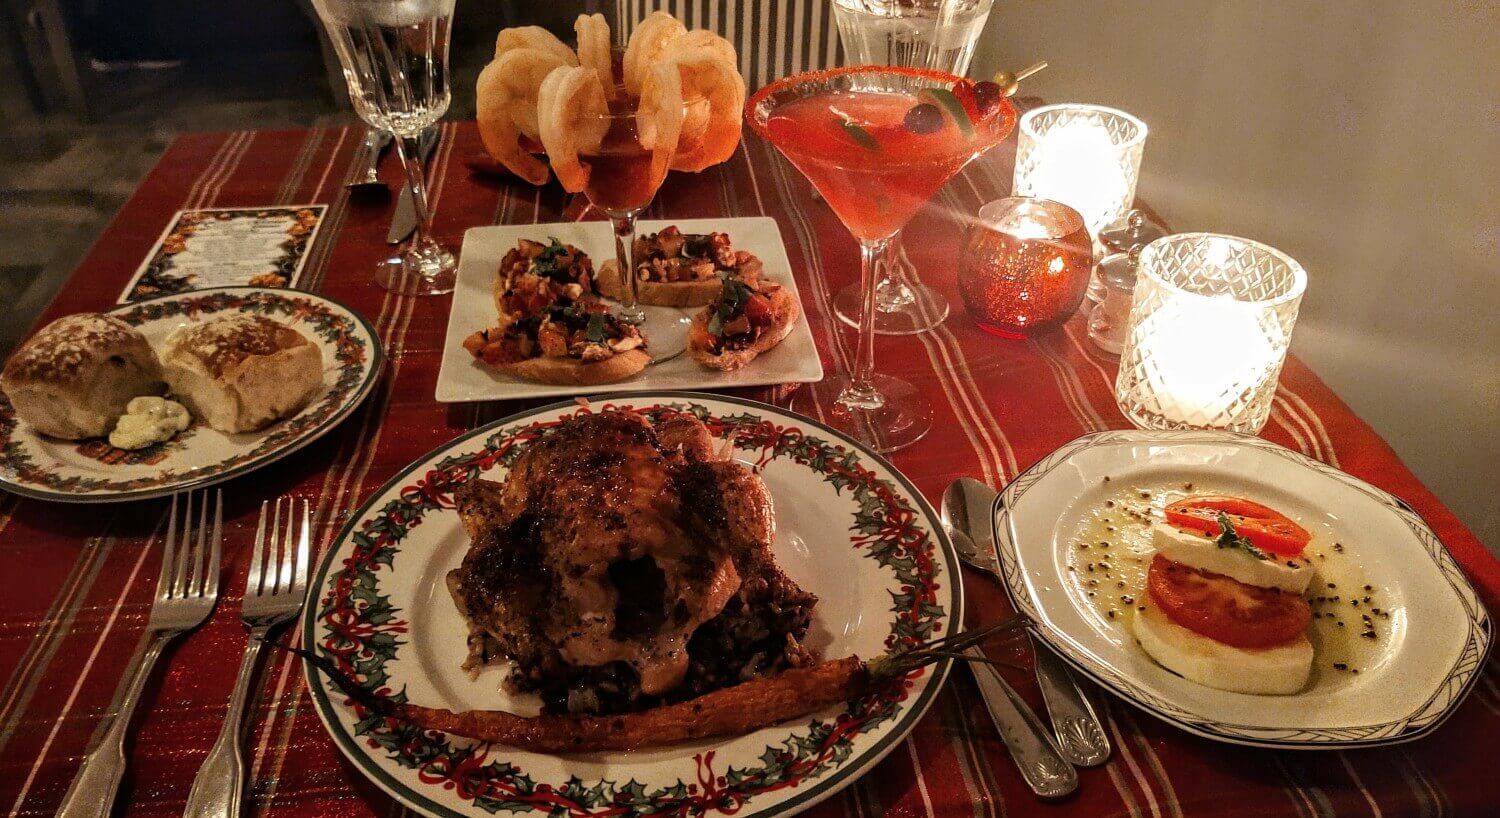 cornish hen dinner on Christmas plates served with rolls, cocktail shrimp and drinks